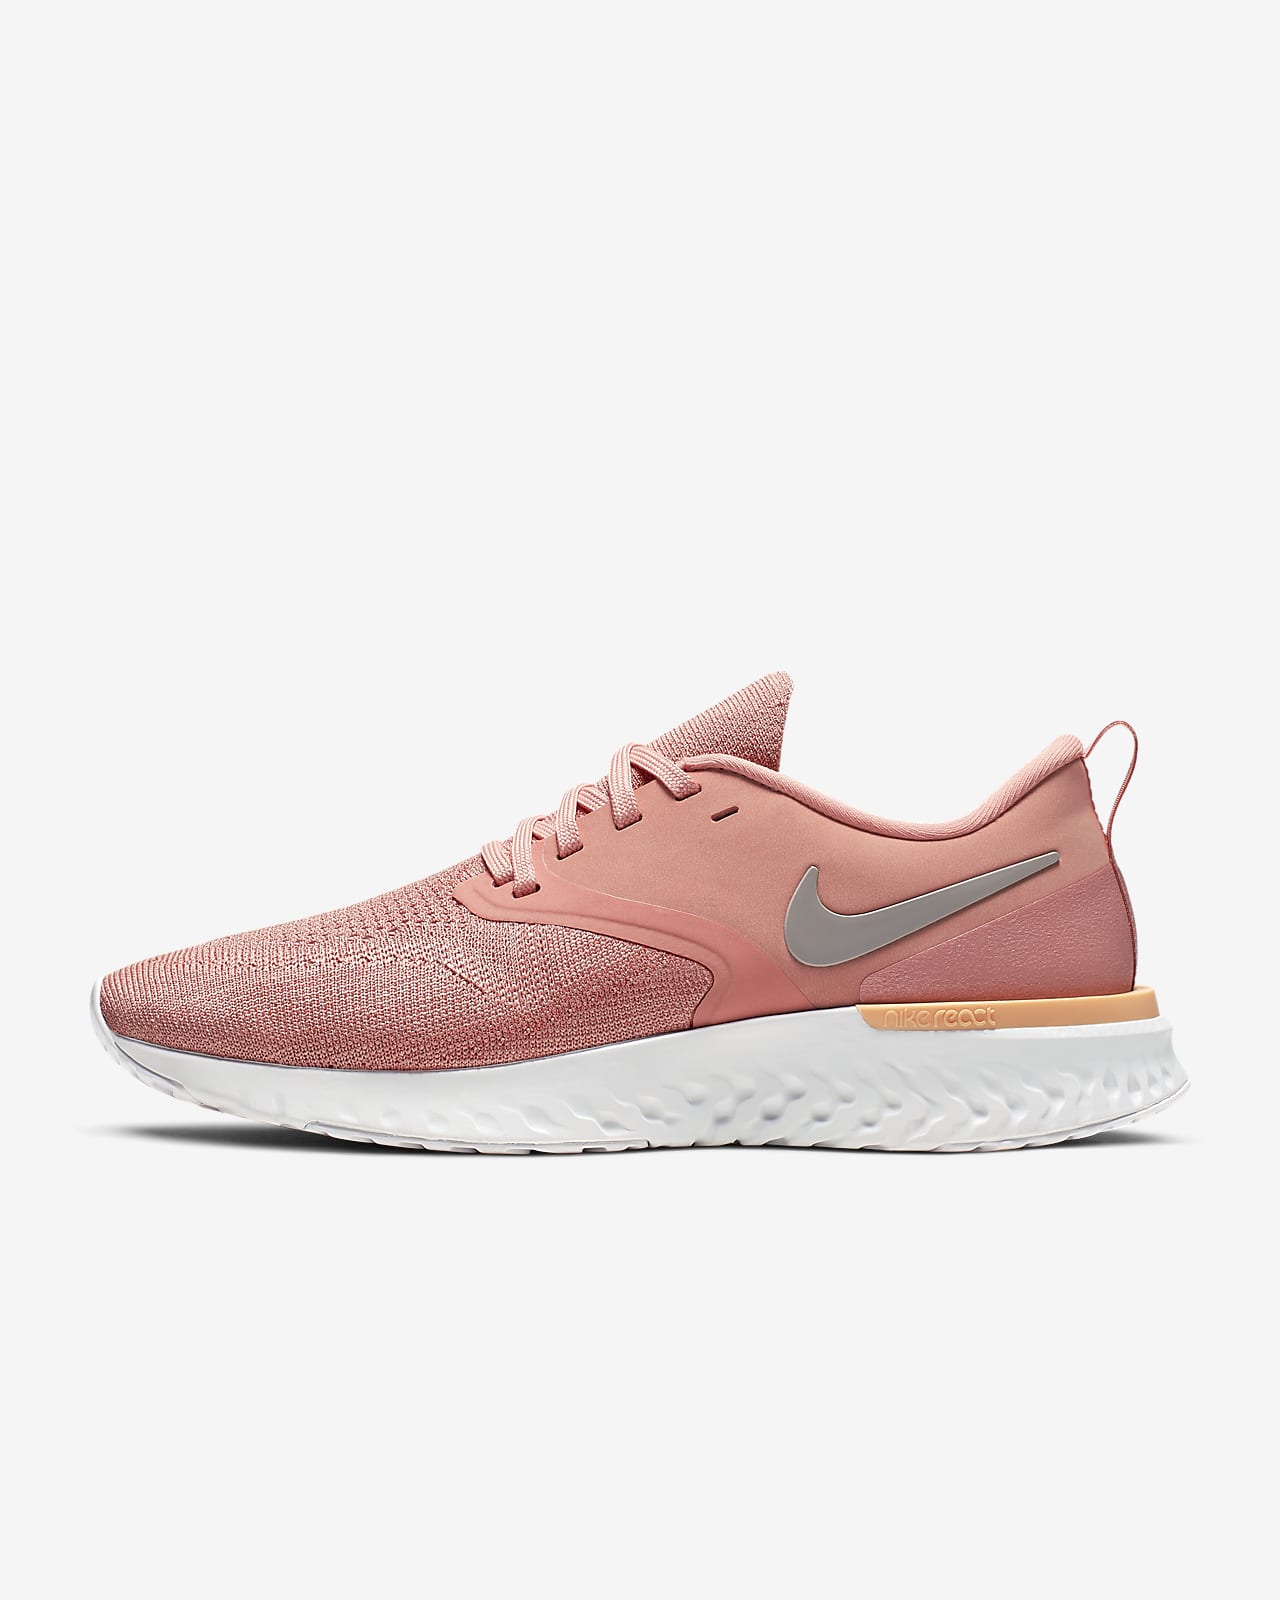 nike odyssey react canada Promotions